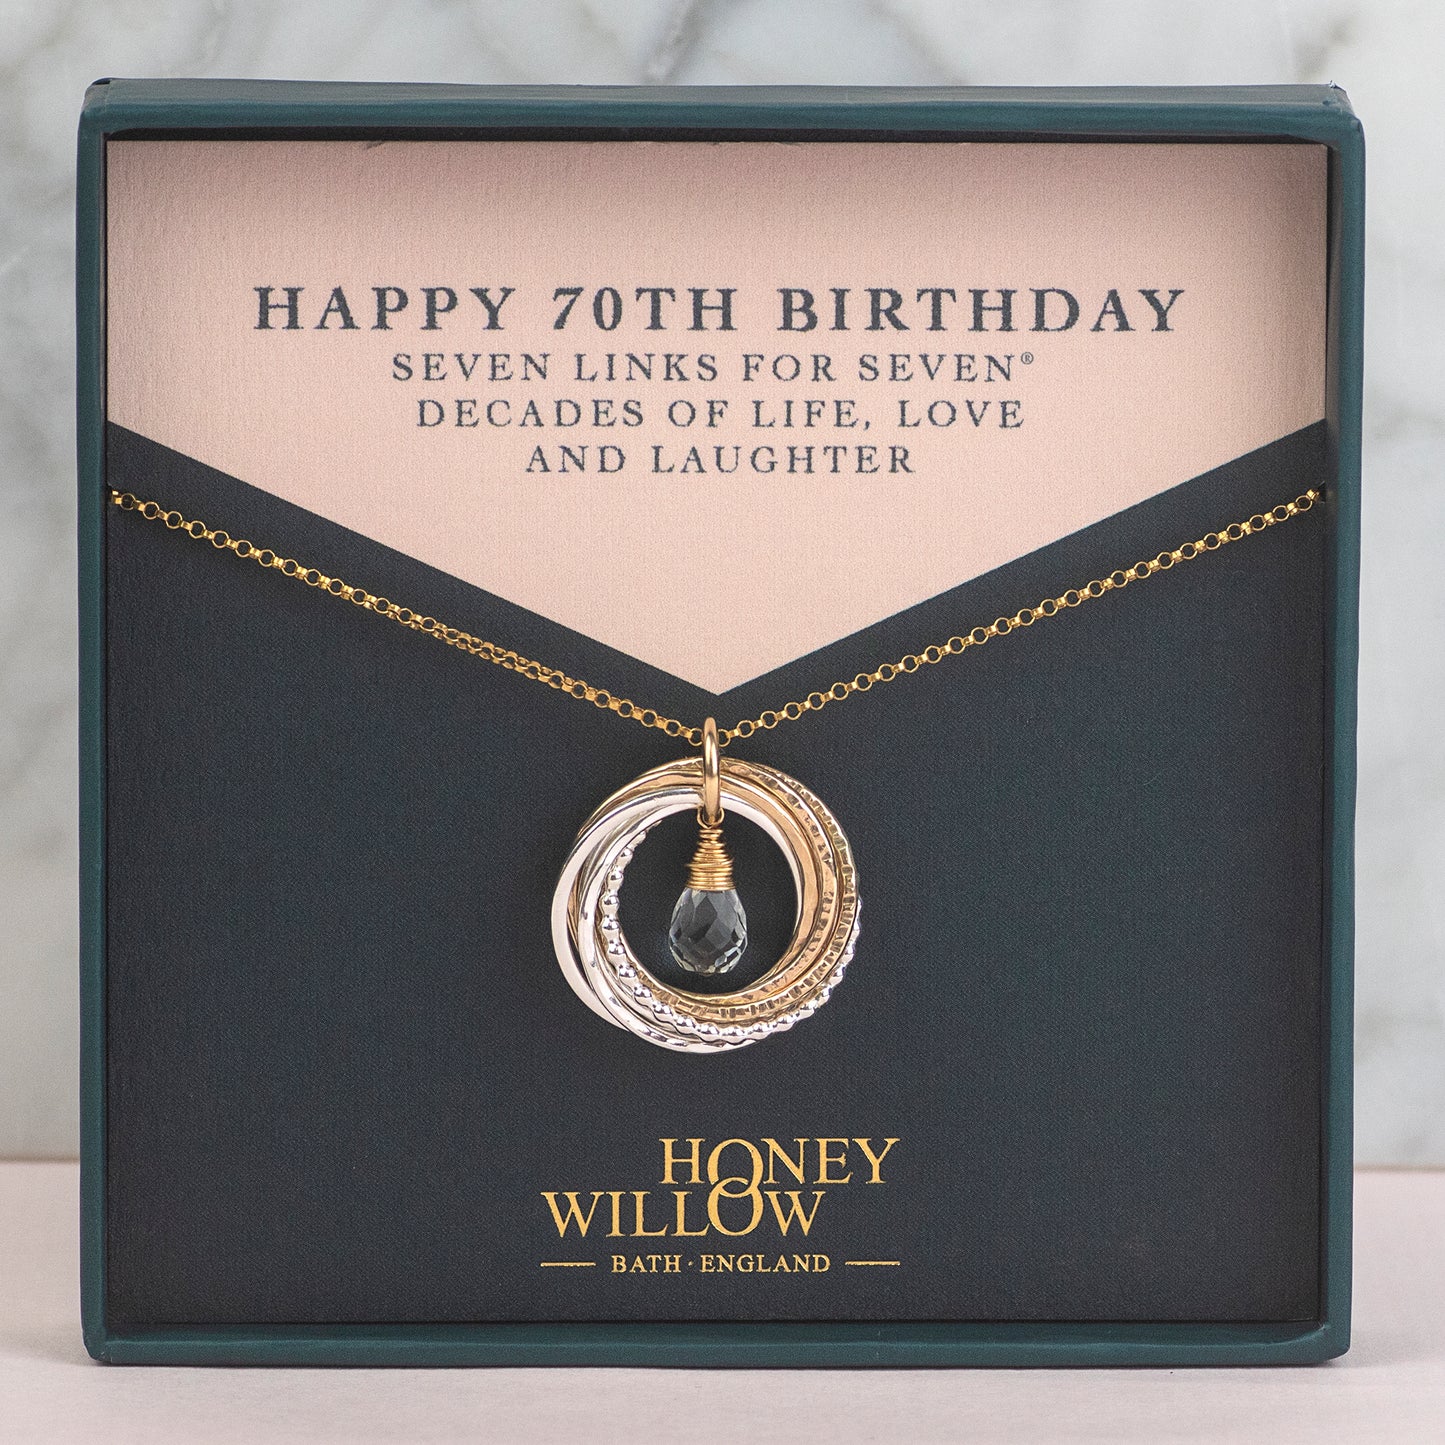 70th Birthday Birthstone Necklace - The Original 7 Links for 7 Decades Necklace - Silver & Gold